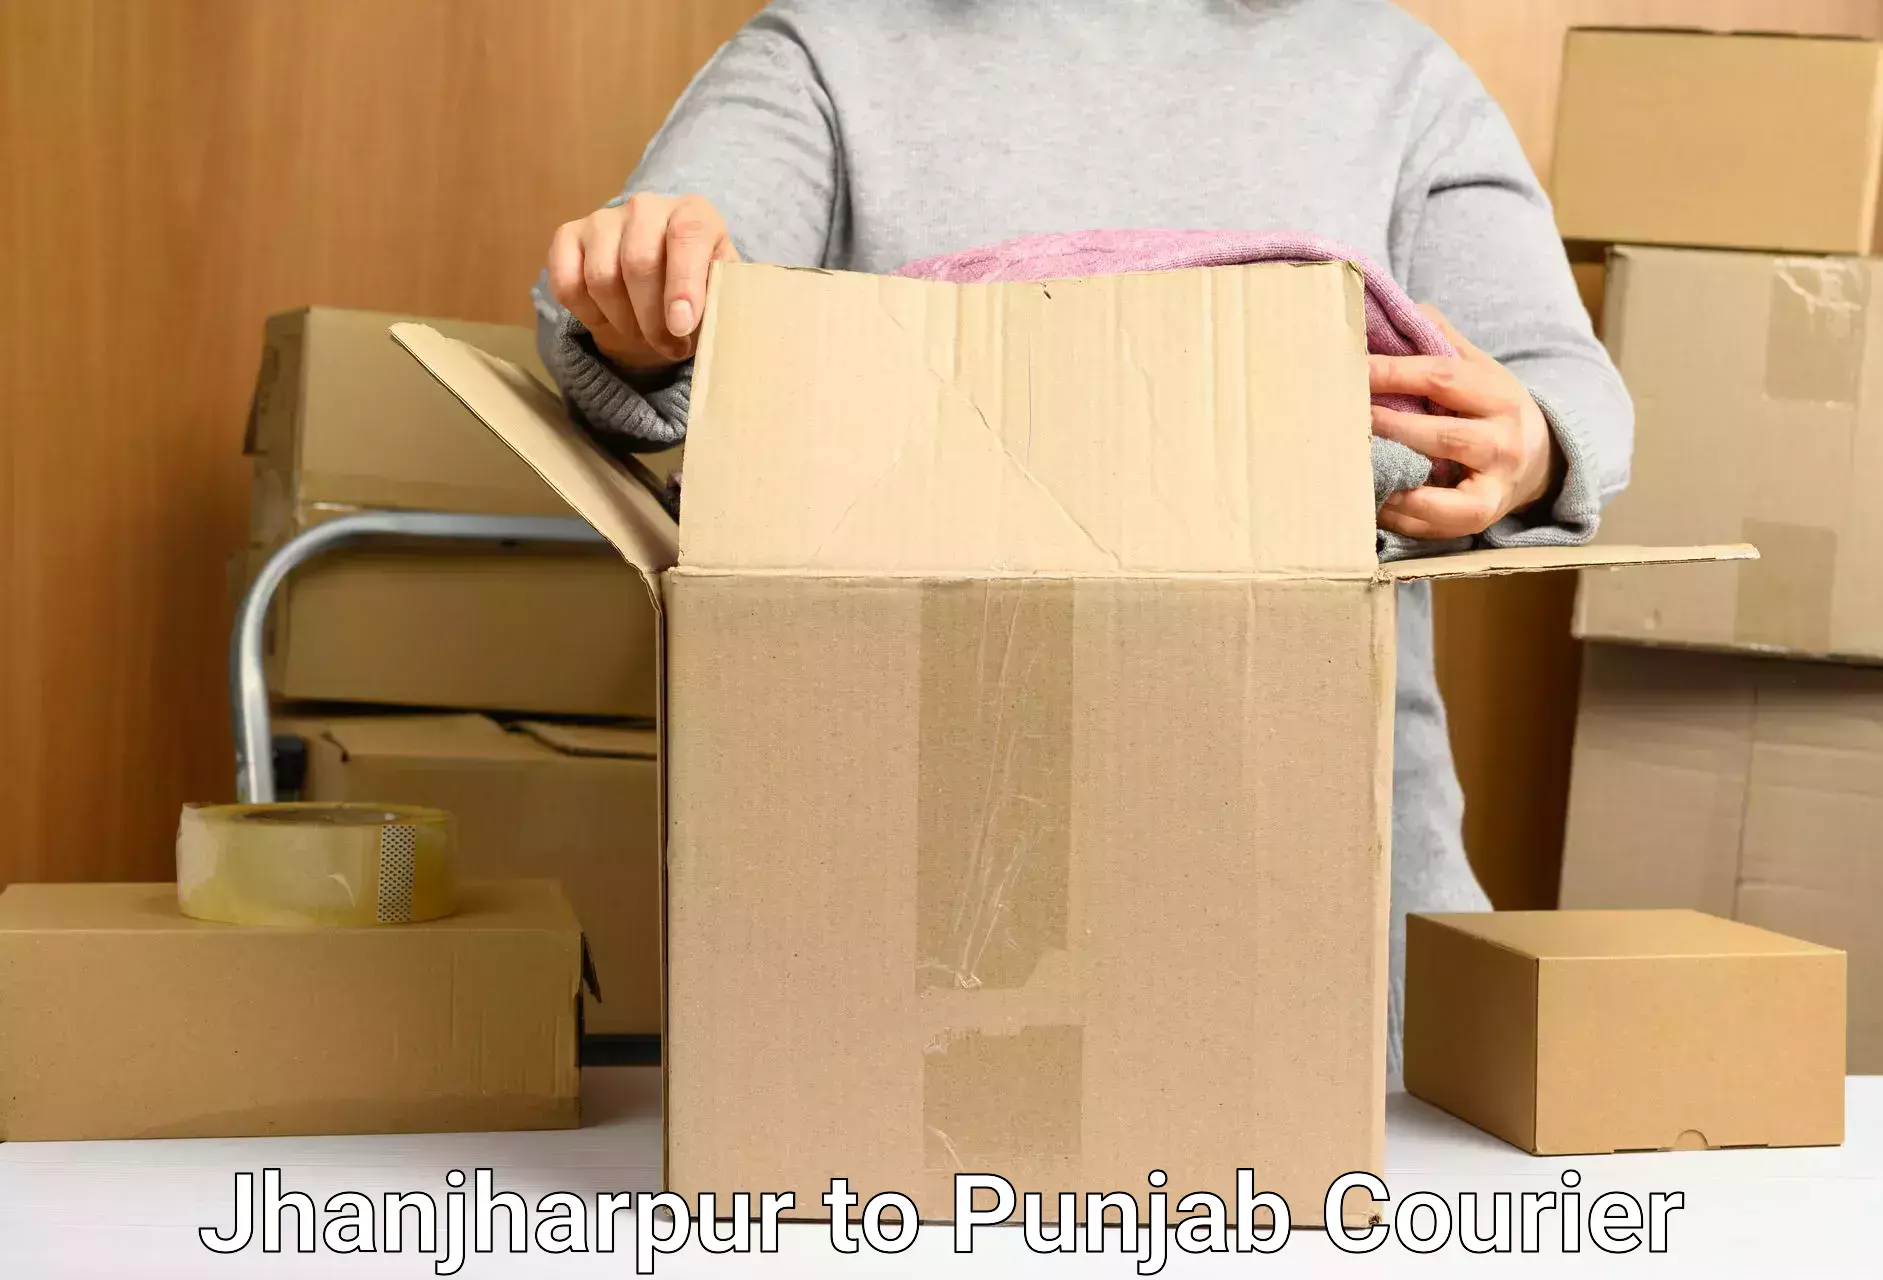 Cost-effective courier options Jhanjharpur to Amritsar